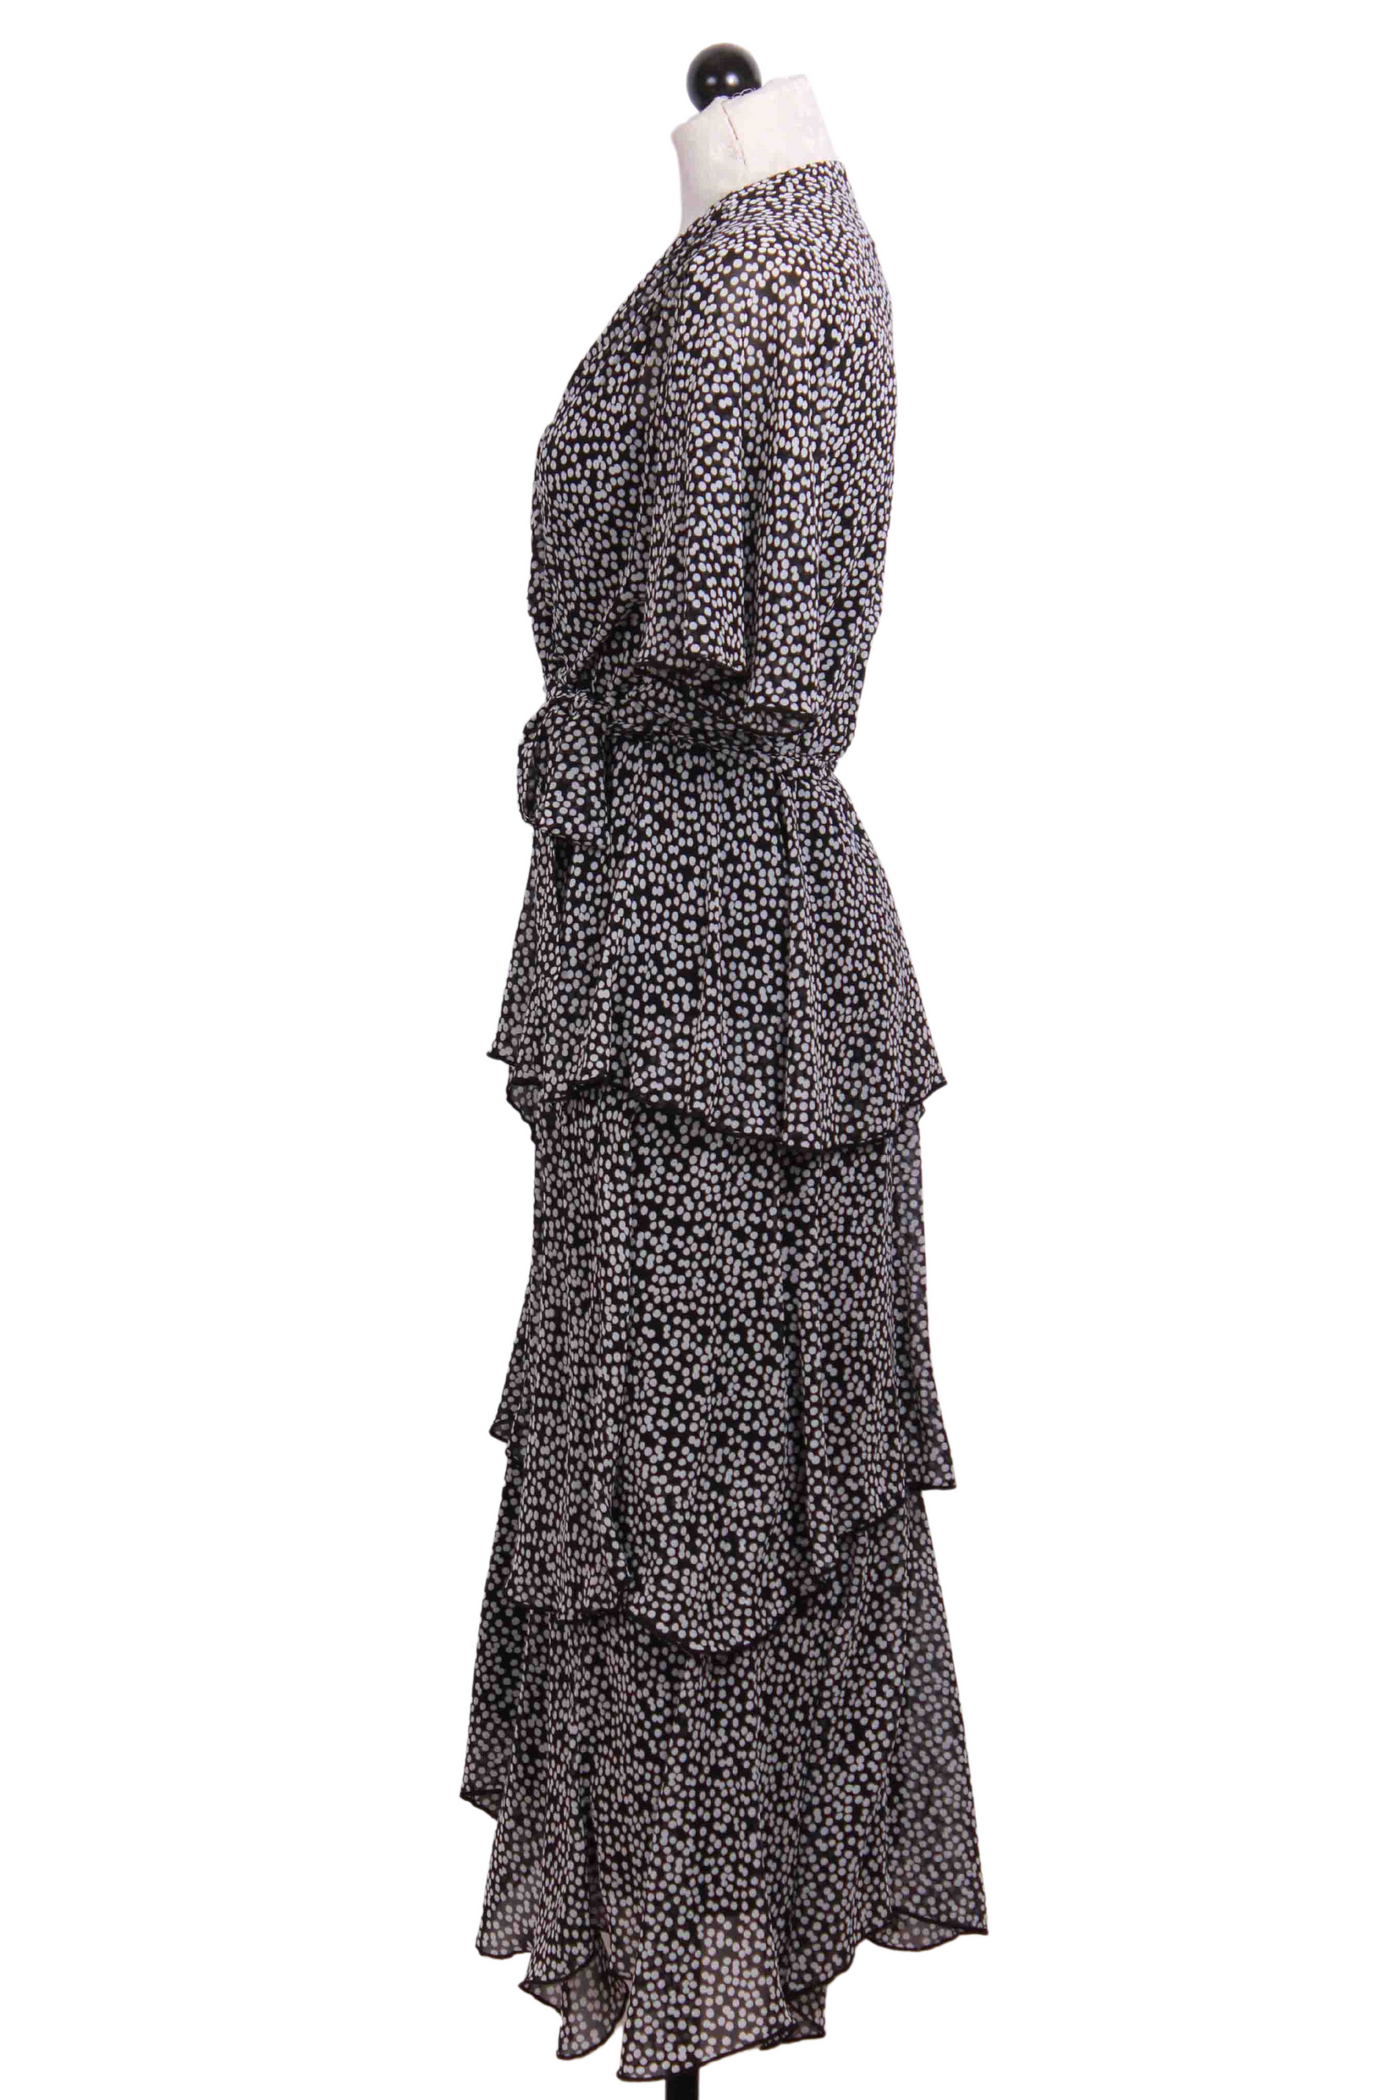 side view of Black and White Tiered Polka Dot Dress by Frank Lyman